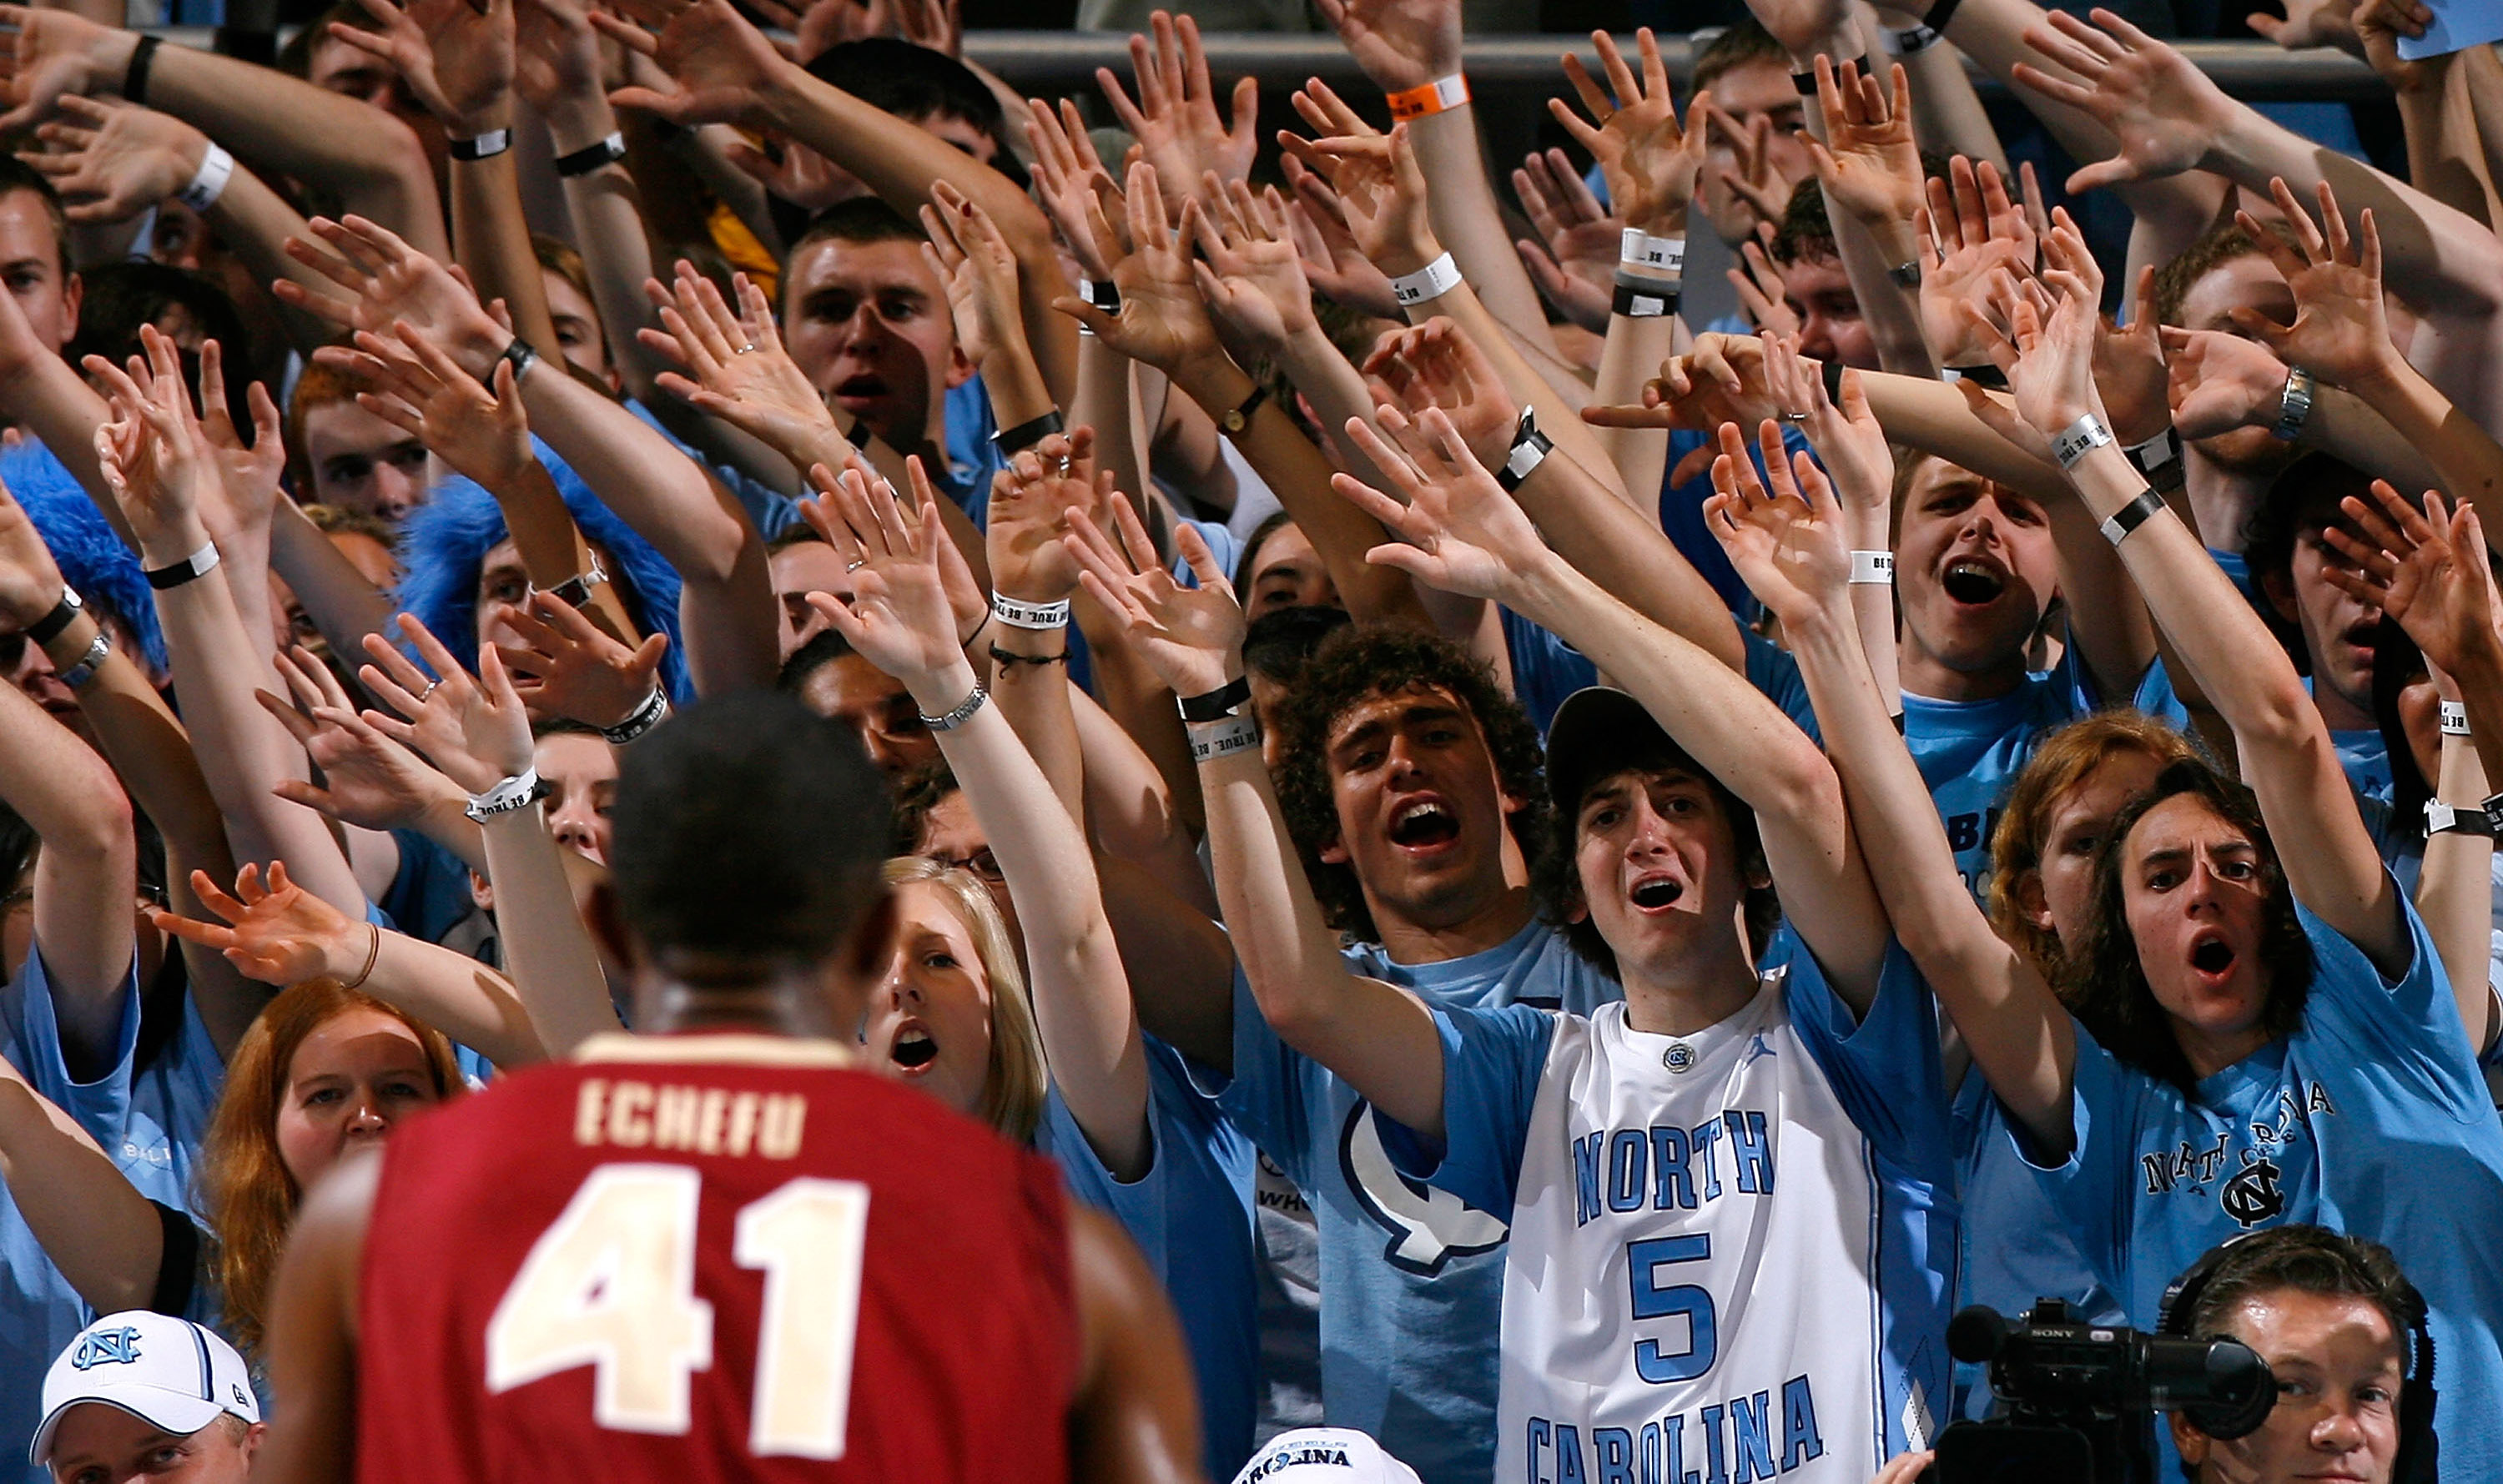 CHAPEL HILL, NC - MARCH 04:  The North Carolina Tar Heel fans heckle Uche Echefu #41 of the Florida State Seminoles during the first half at the Dean E. Smith Center on March 4, 2008 in Chapel Hill, North Carolina.  North Carolina defeated Florida State 9